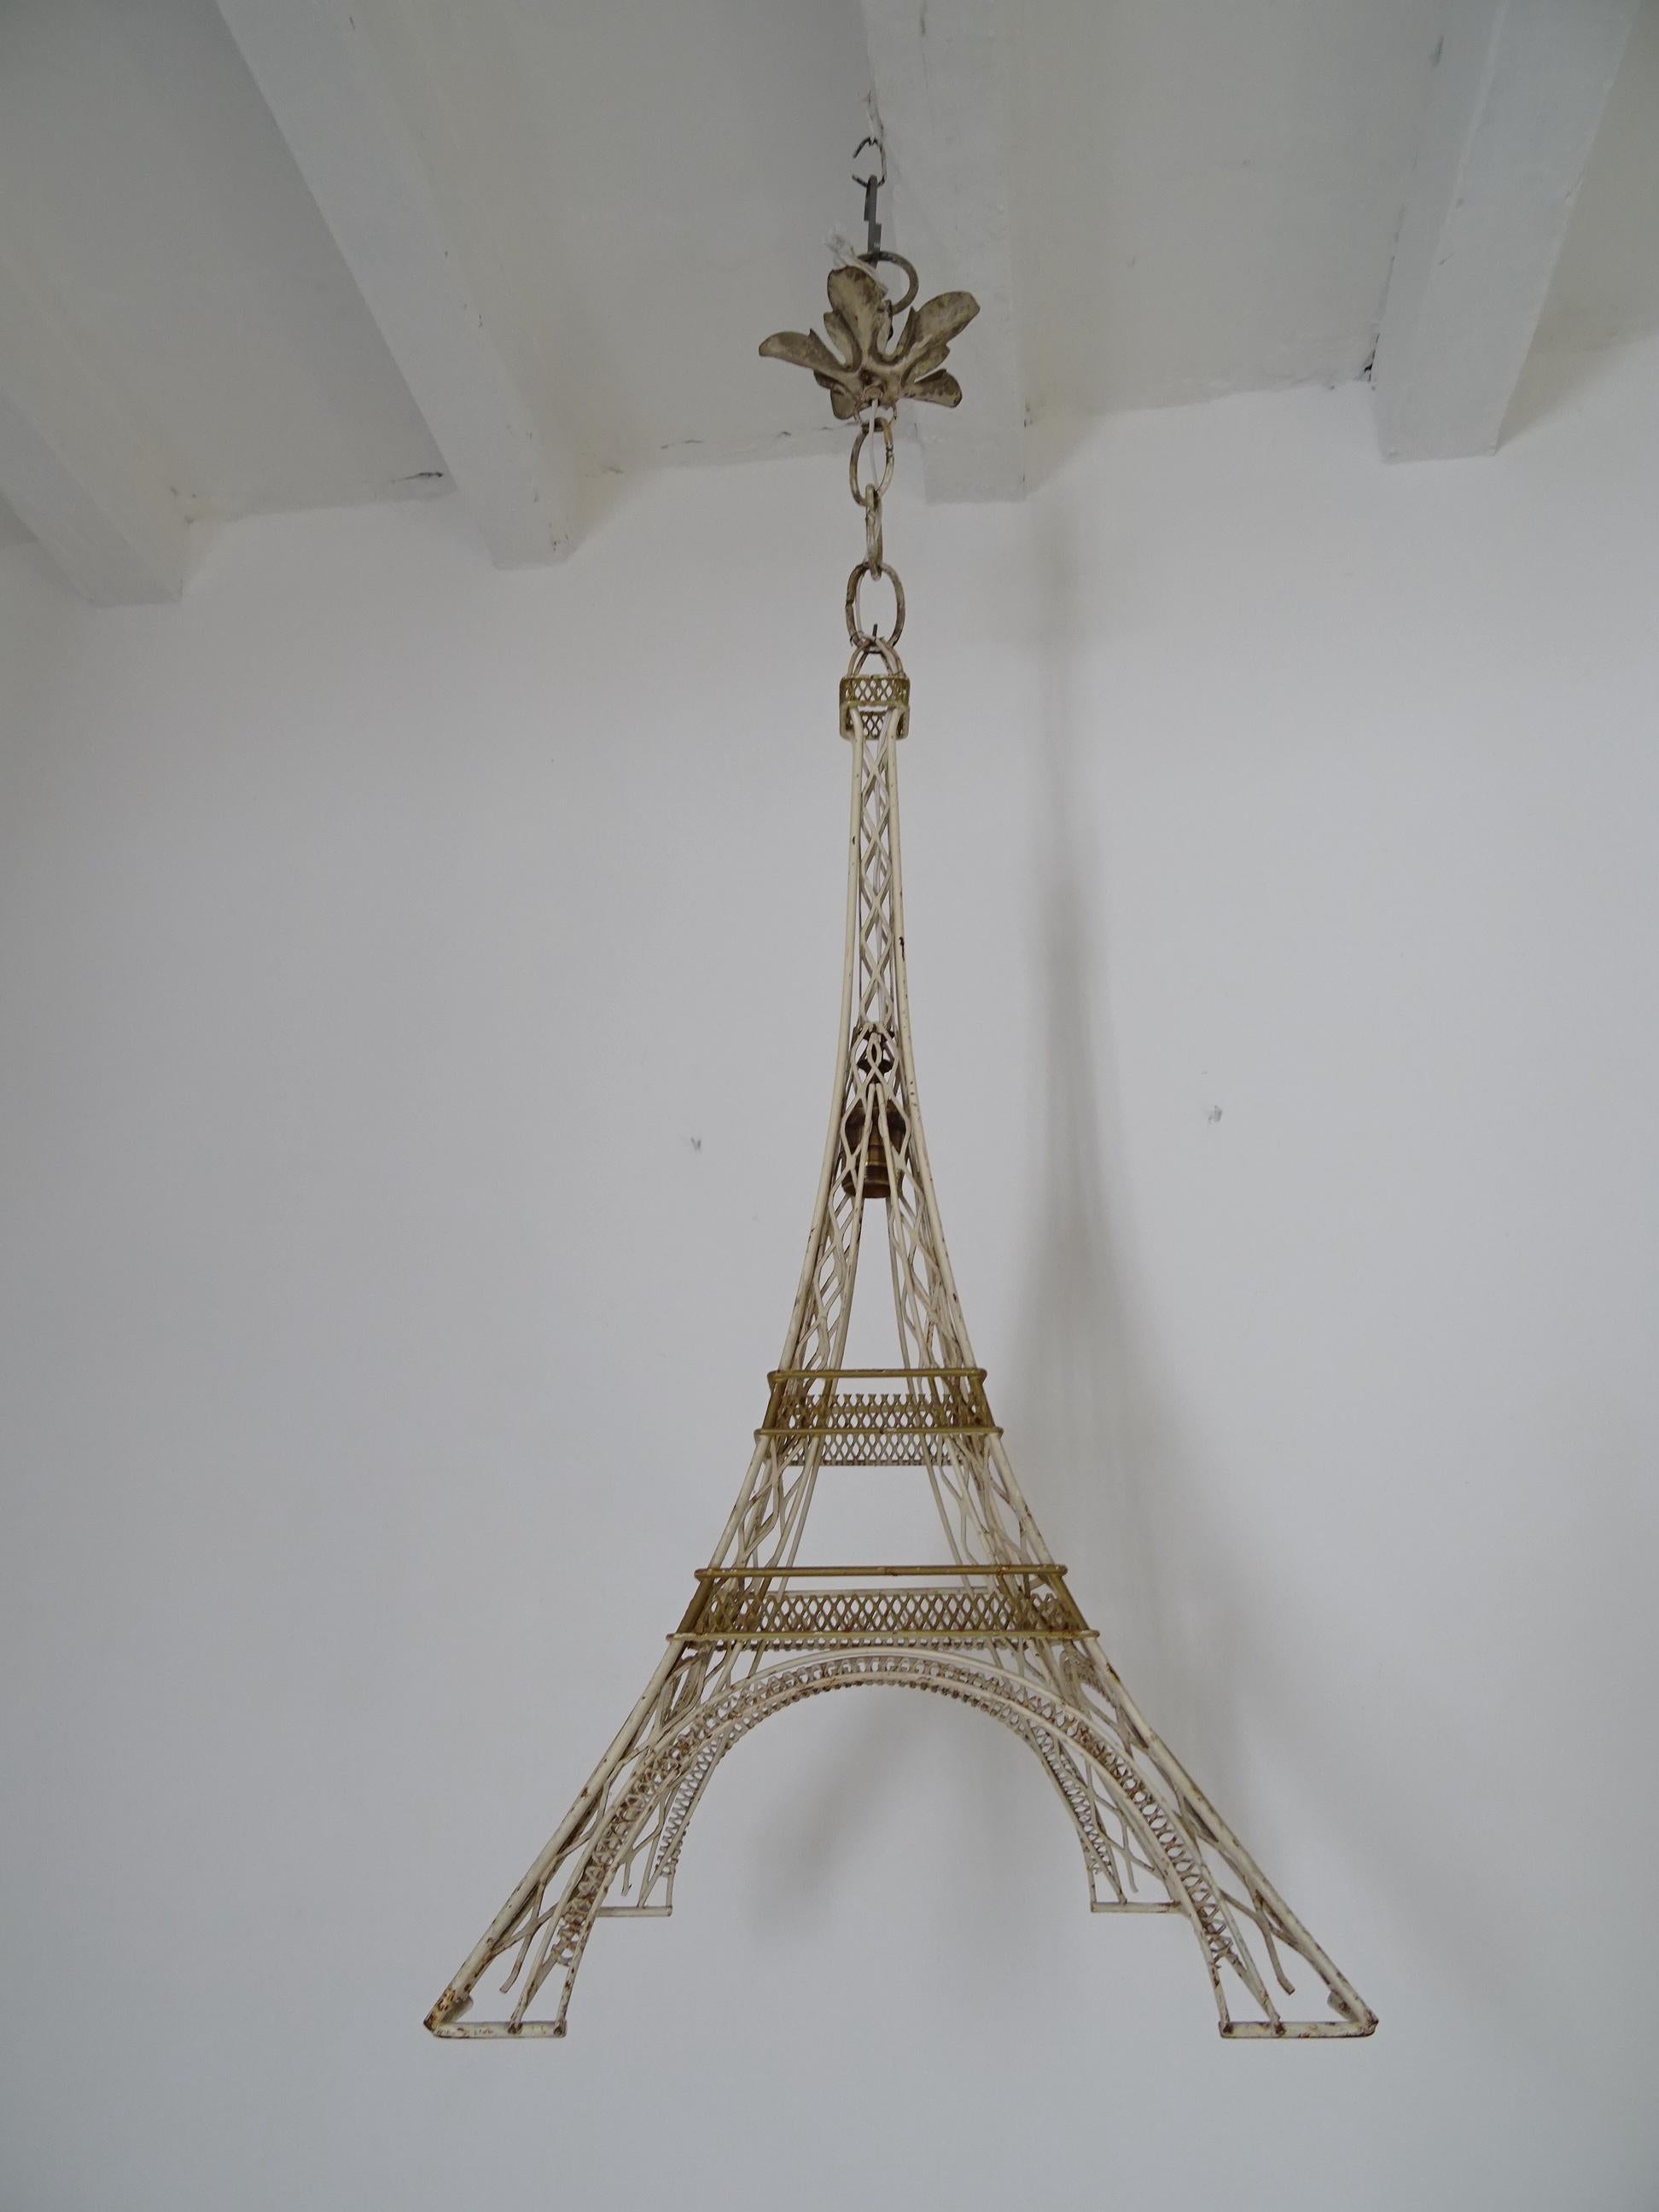 One of a kind chandelier. Housing 1 light, has been rewired with a big certified US UL socket and ready to hang. Found in Paris, France. Made of tole in cream and gold. Free priority UPS shipping from Italy, no custom fees.